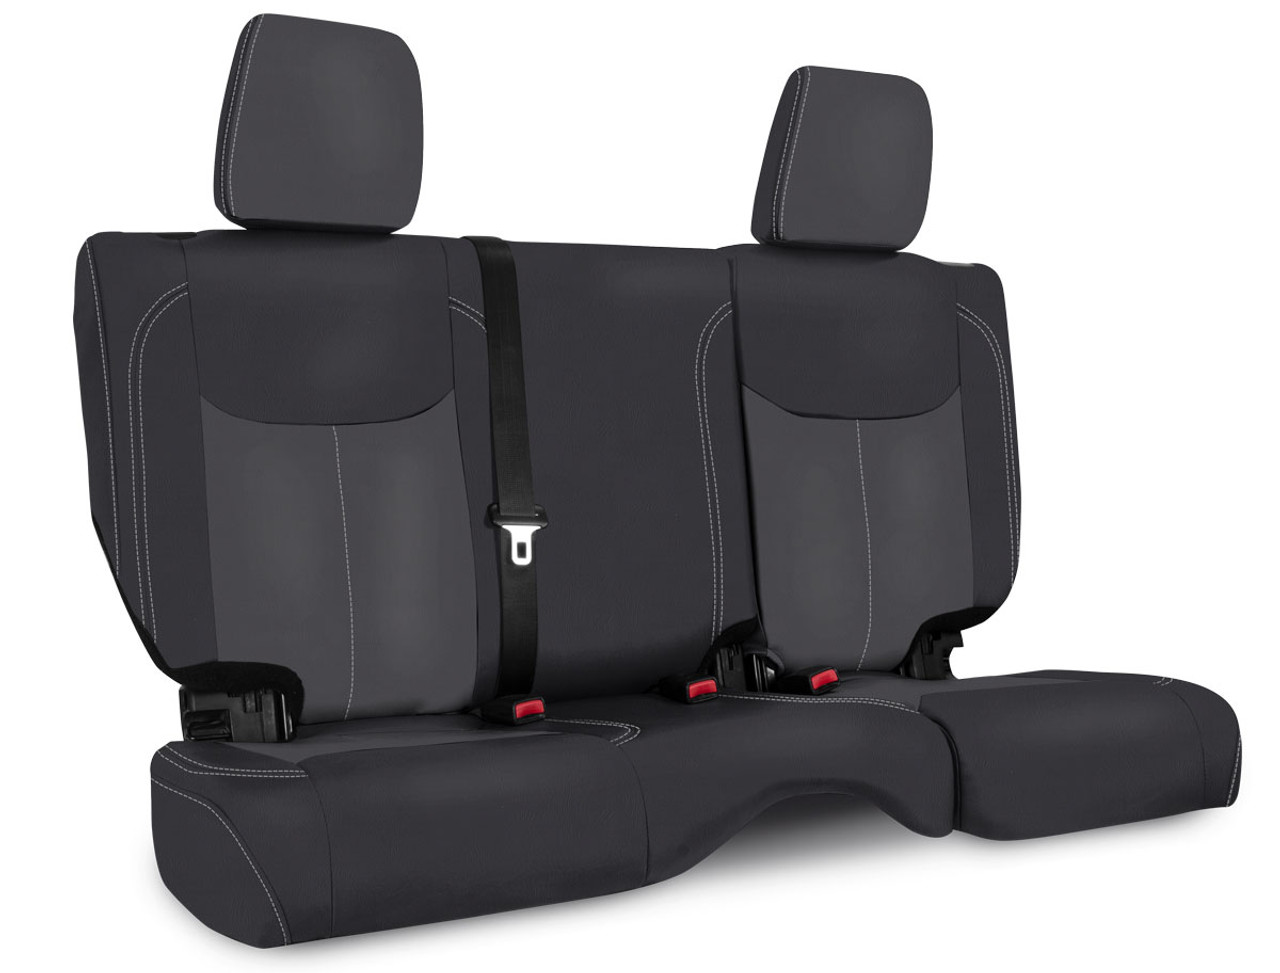 Rear Seat Cover for '13'18 Jeep Wrangler JK, 2 door - Black and grey